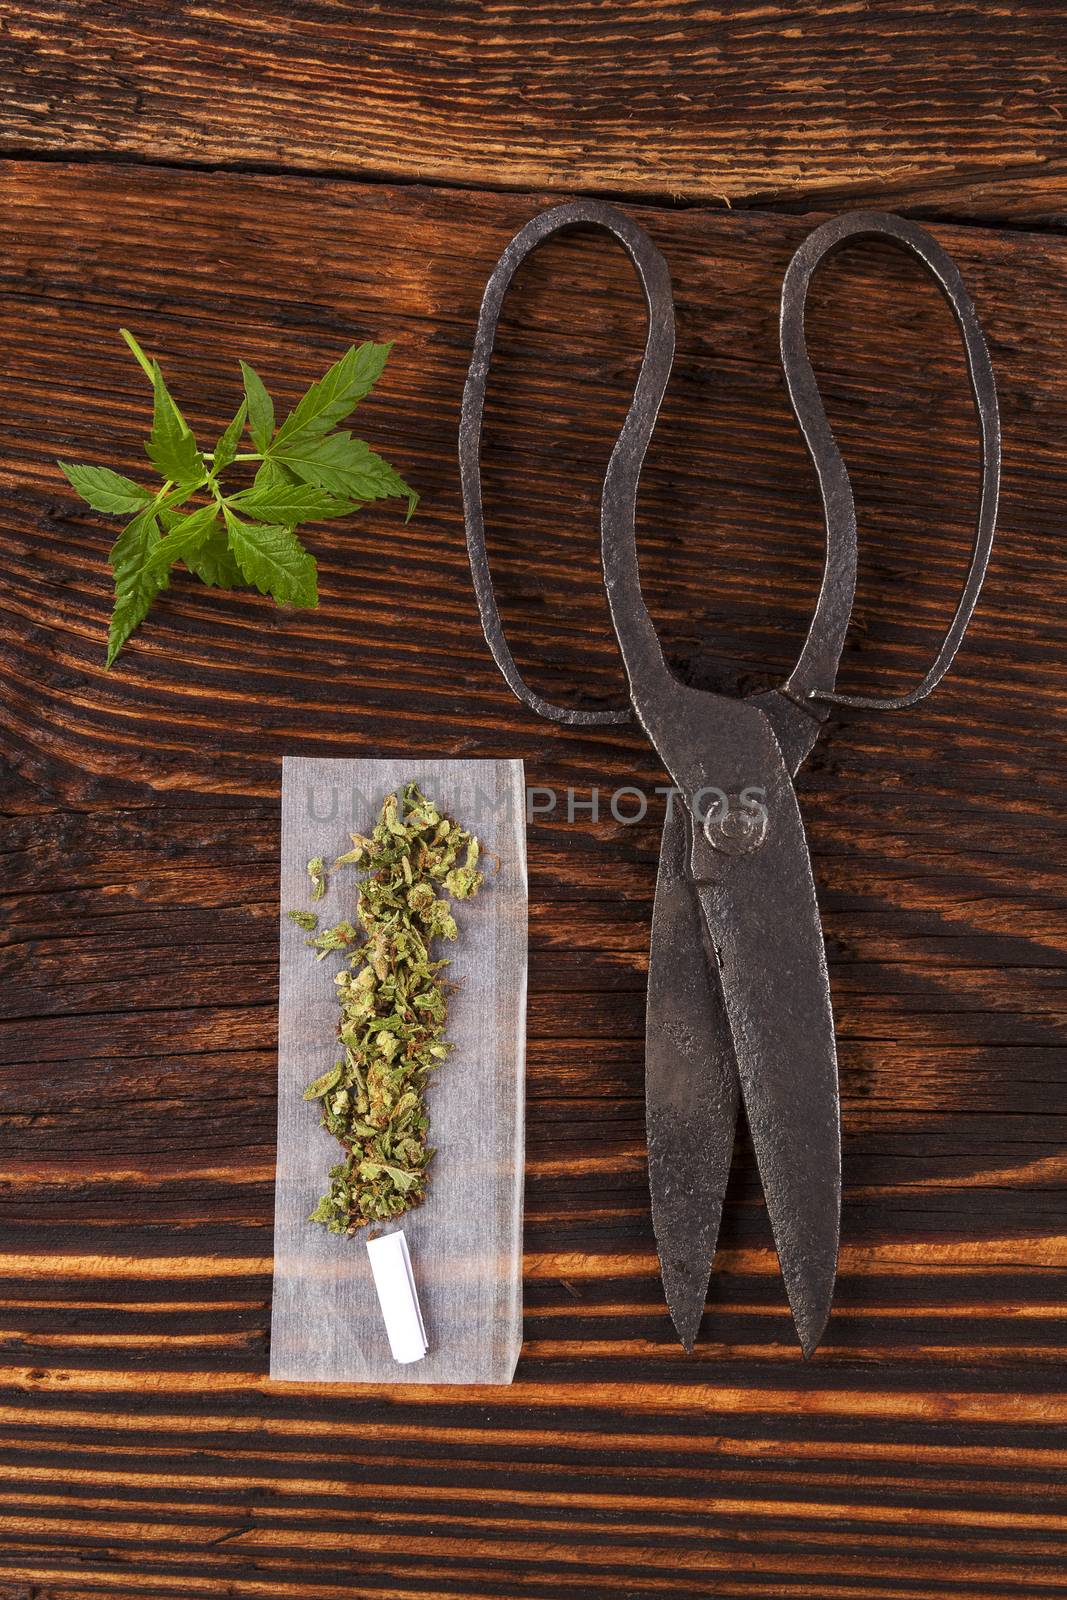 Marijuana abuse. Cannabis bud, joints, rolling paper on wooden textured background. 